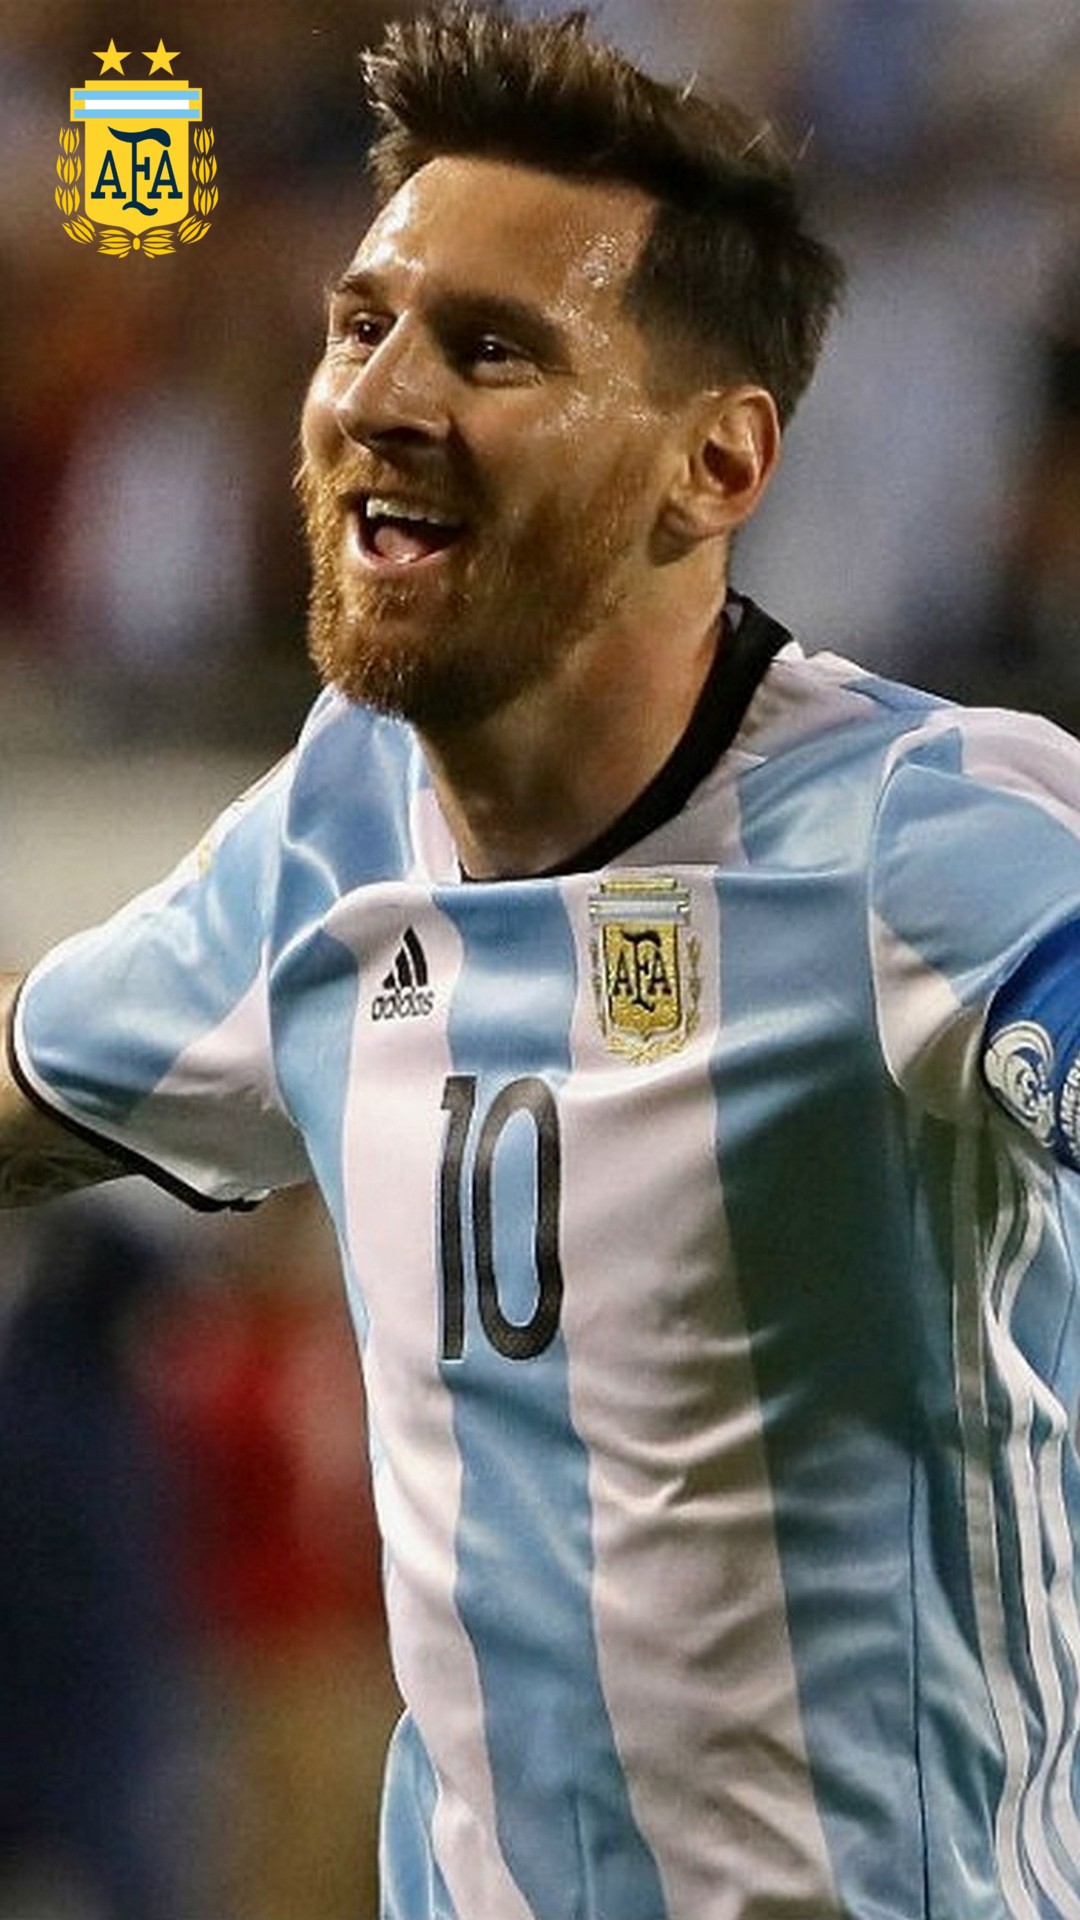 Messi Argentina Android Wallpaper with image resolution 1080x1920 pixel. You can make this wallpaper for your Android backgrounds, Tablet, Smartphones Screensavers and Mobile Phone Lock Screen